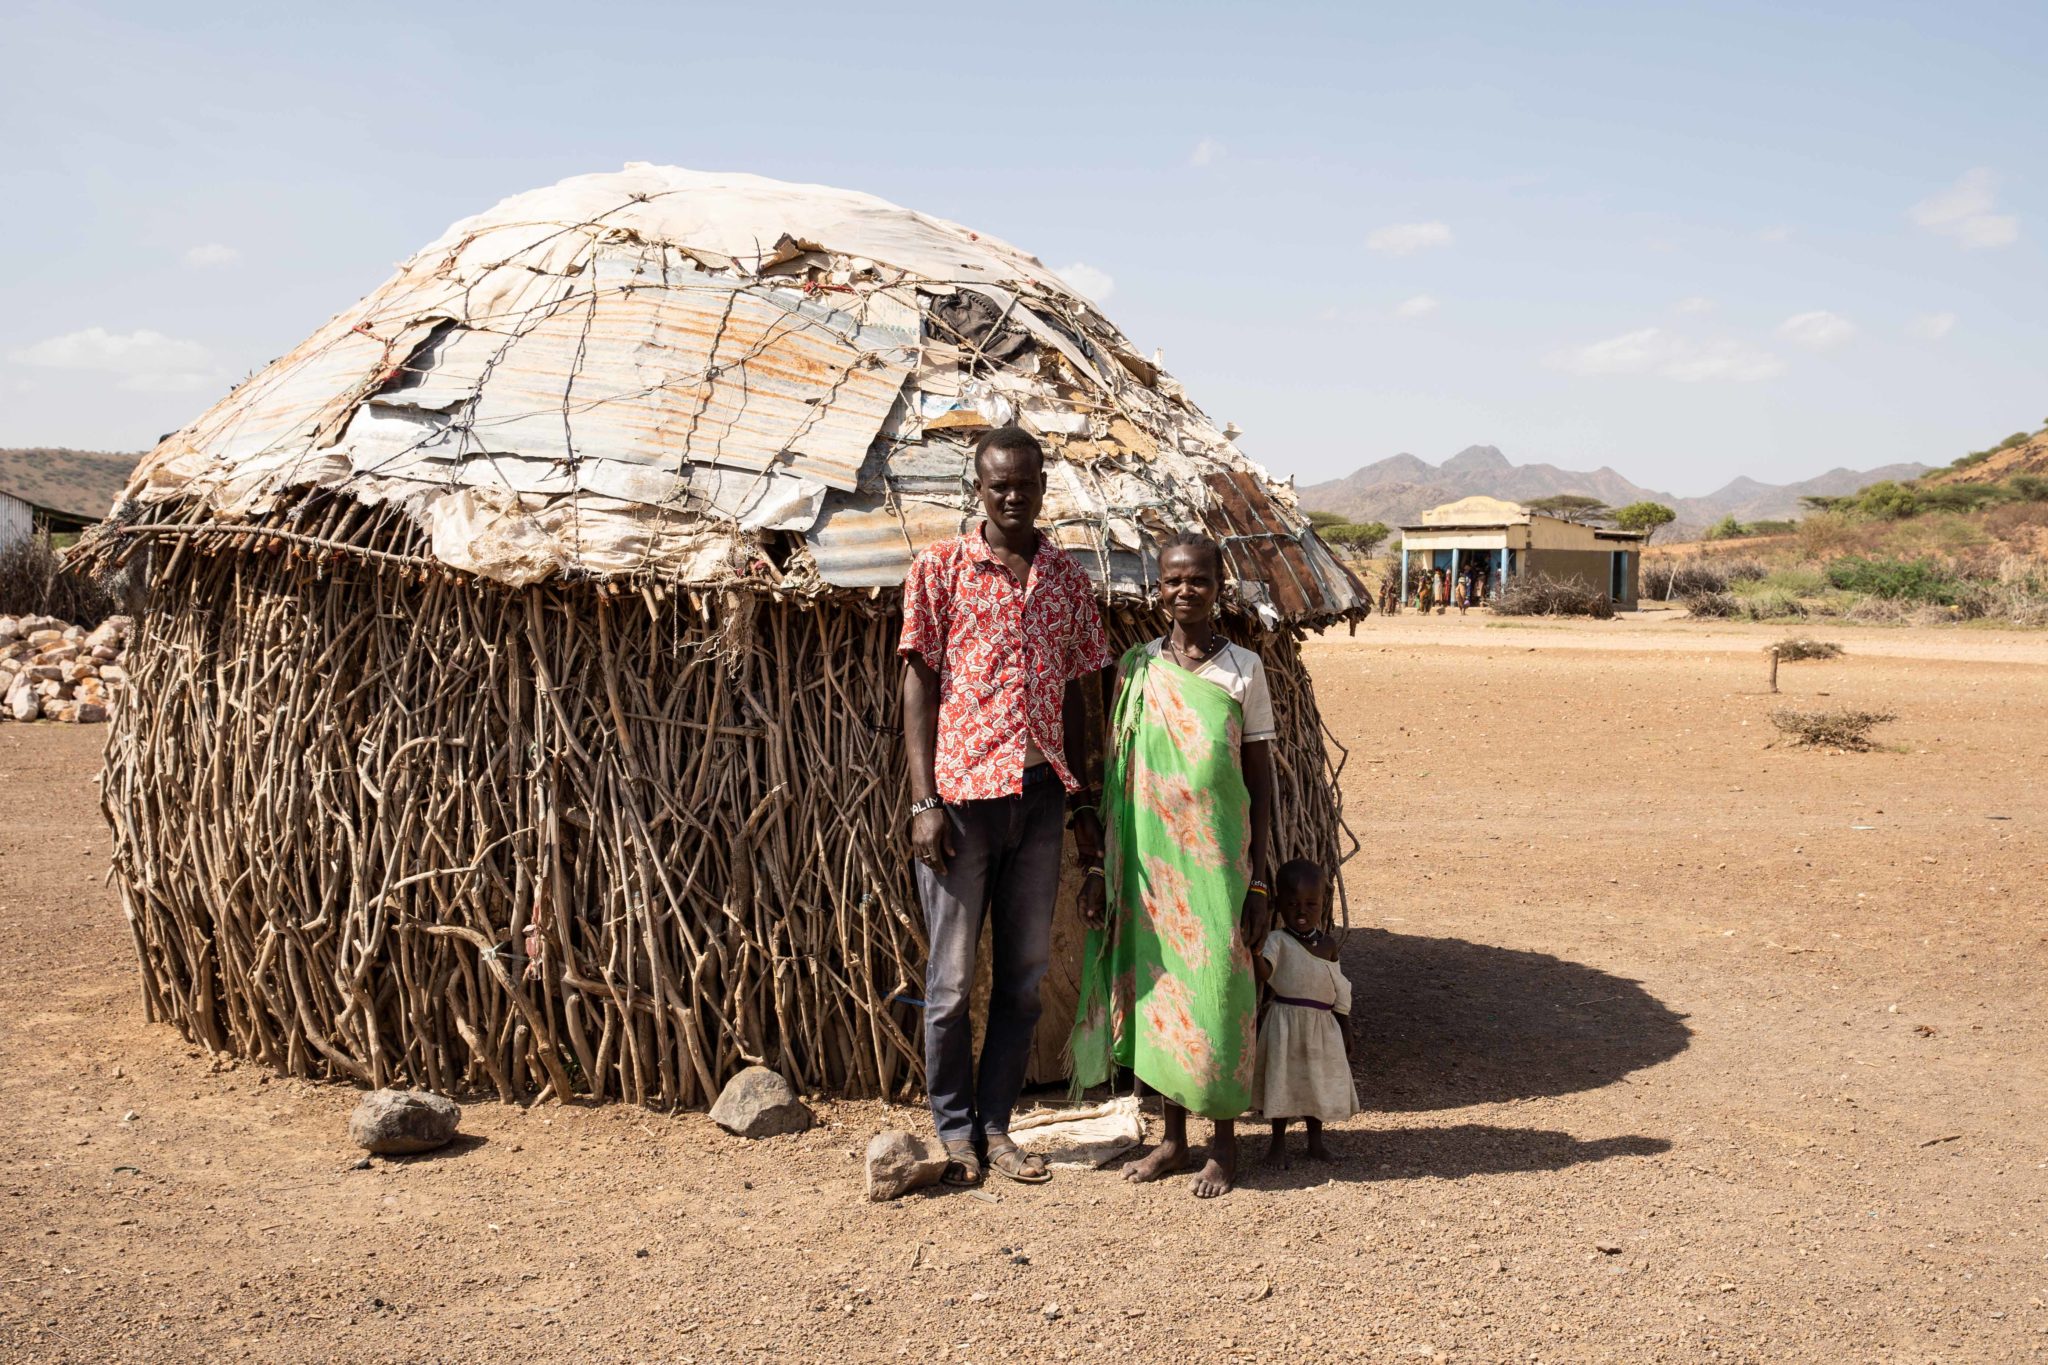 Ereng Kaleng Kalimapus poses for a photo with his wife and child outside their bedroom in Milimatatu Village, Kaeris, Turkana County in Northern Kenya, 27-06-22. Image: Lisa Murray/Concern Worldwide.